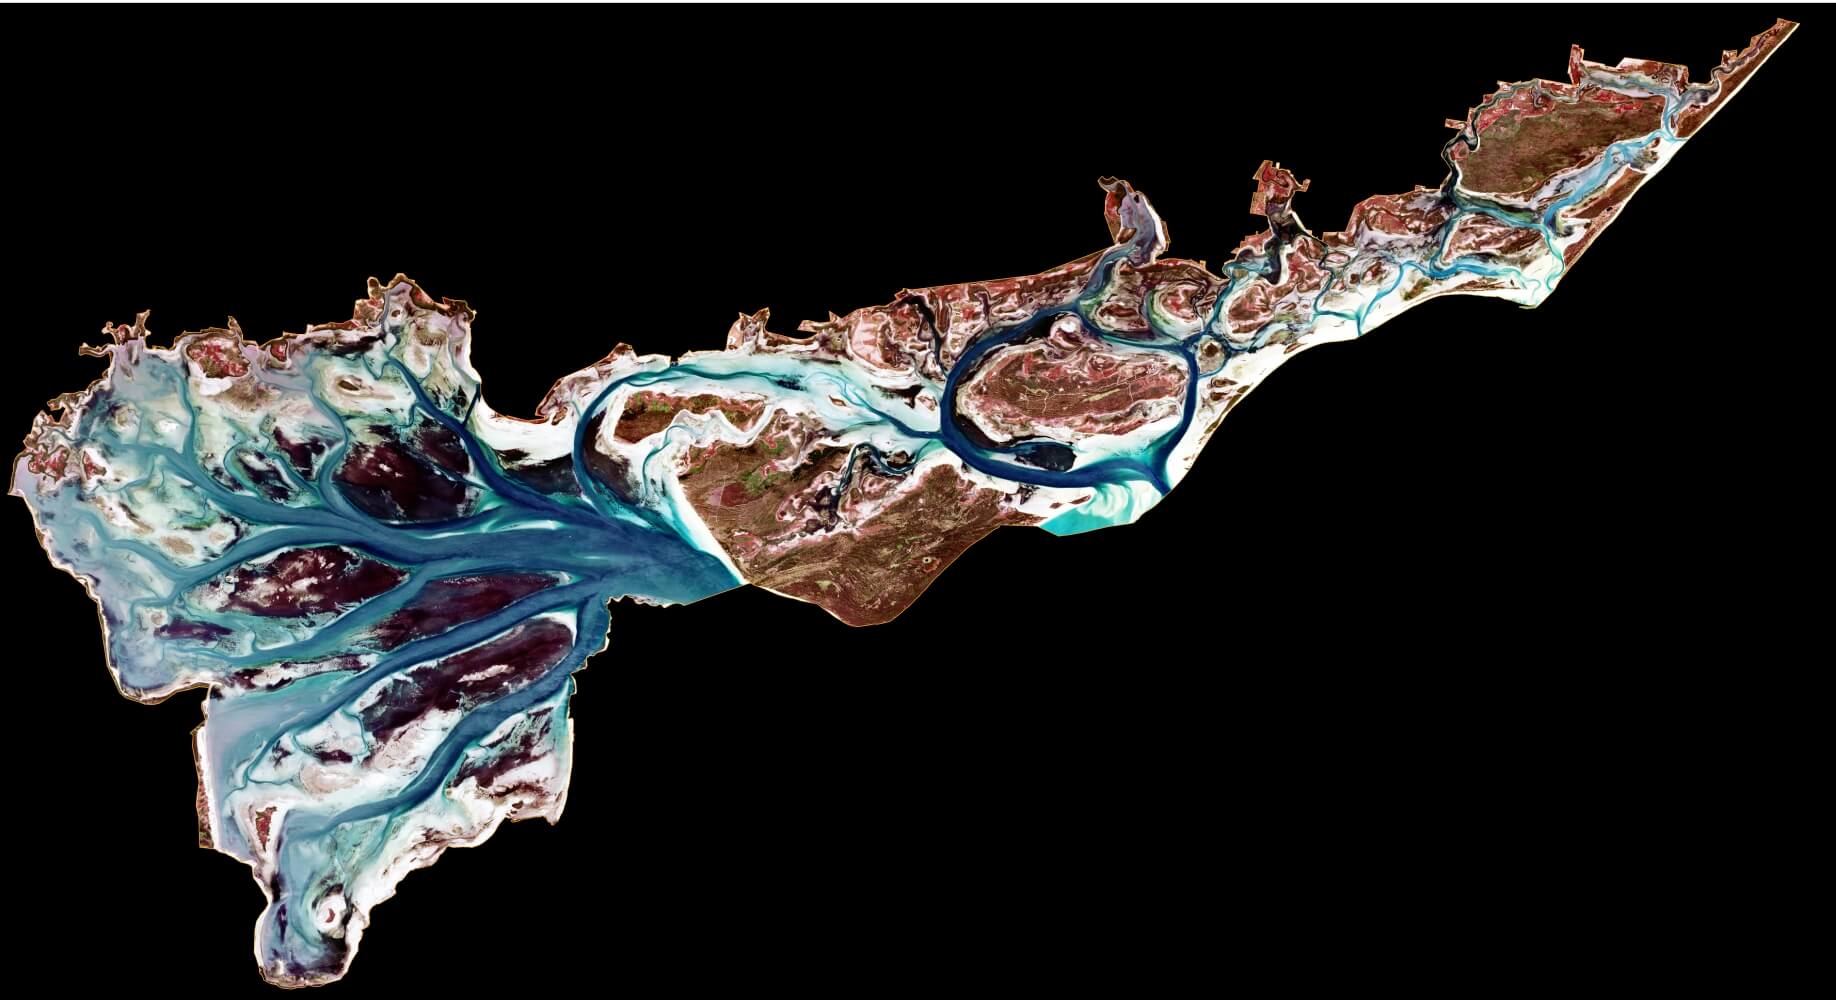 Seninel-2 imagery of the Corner Inlet Ramsar Site with segrass beds highlighed burgundy red by applying an equialise histograms colour stretch